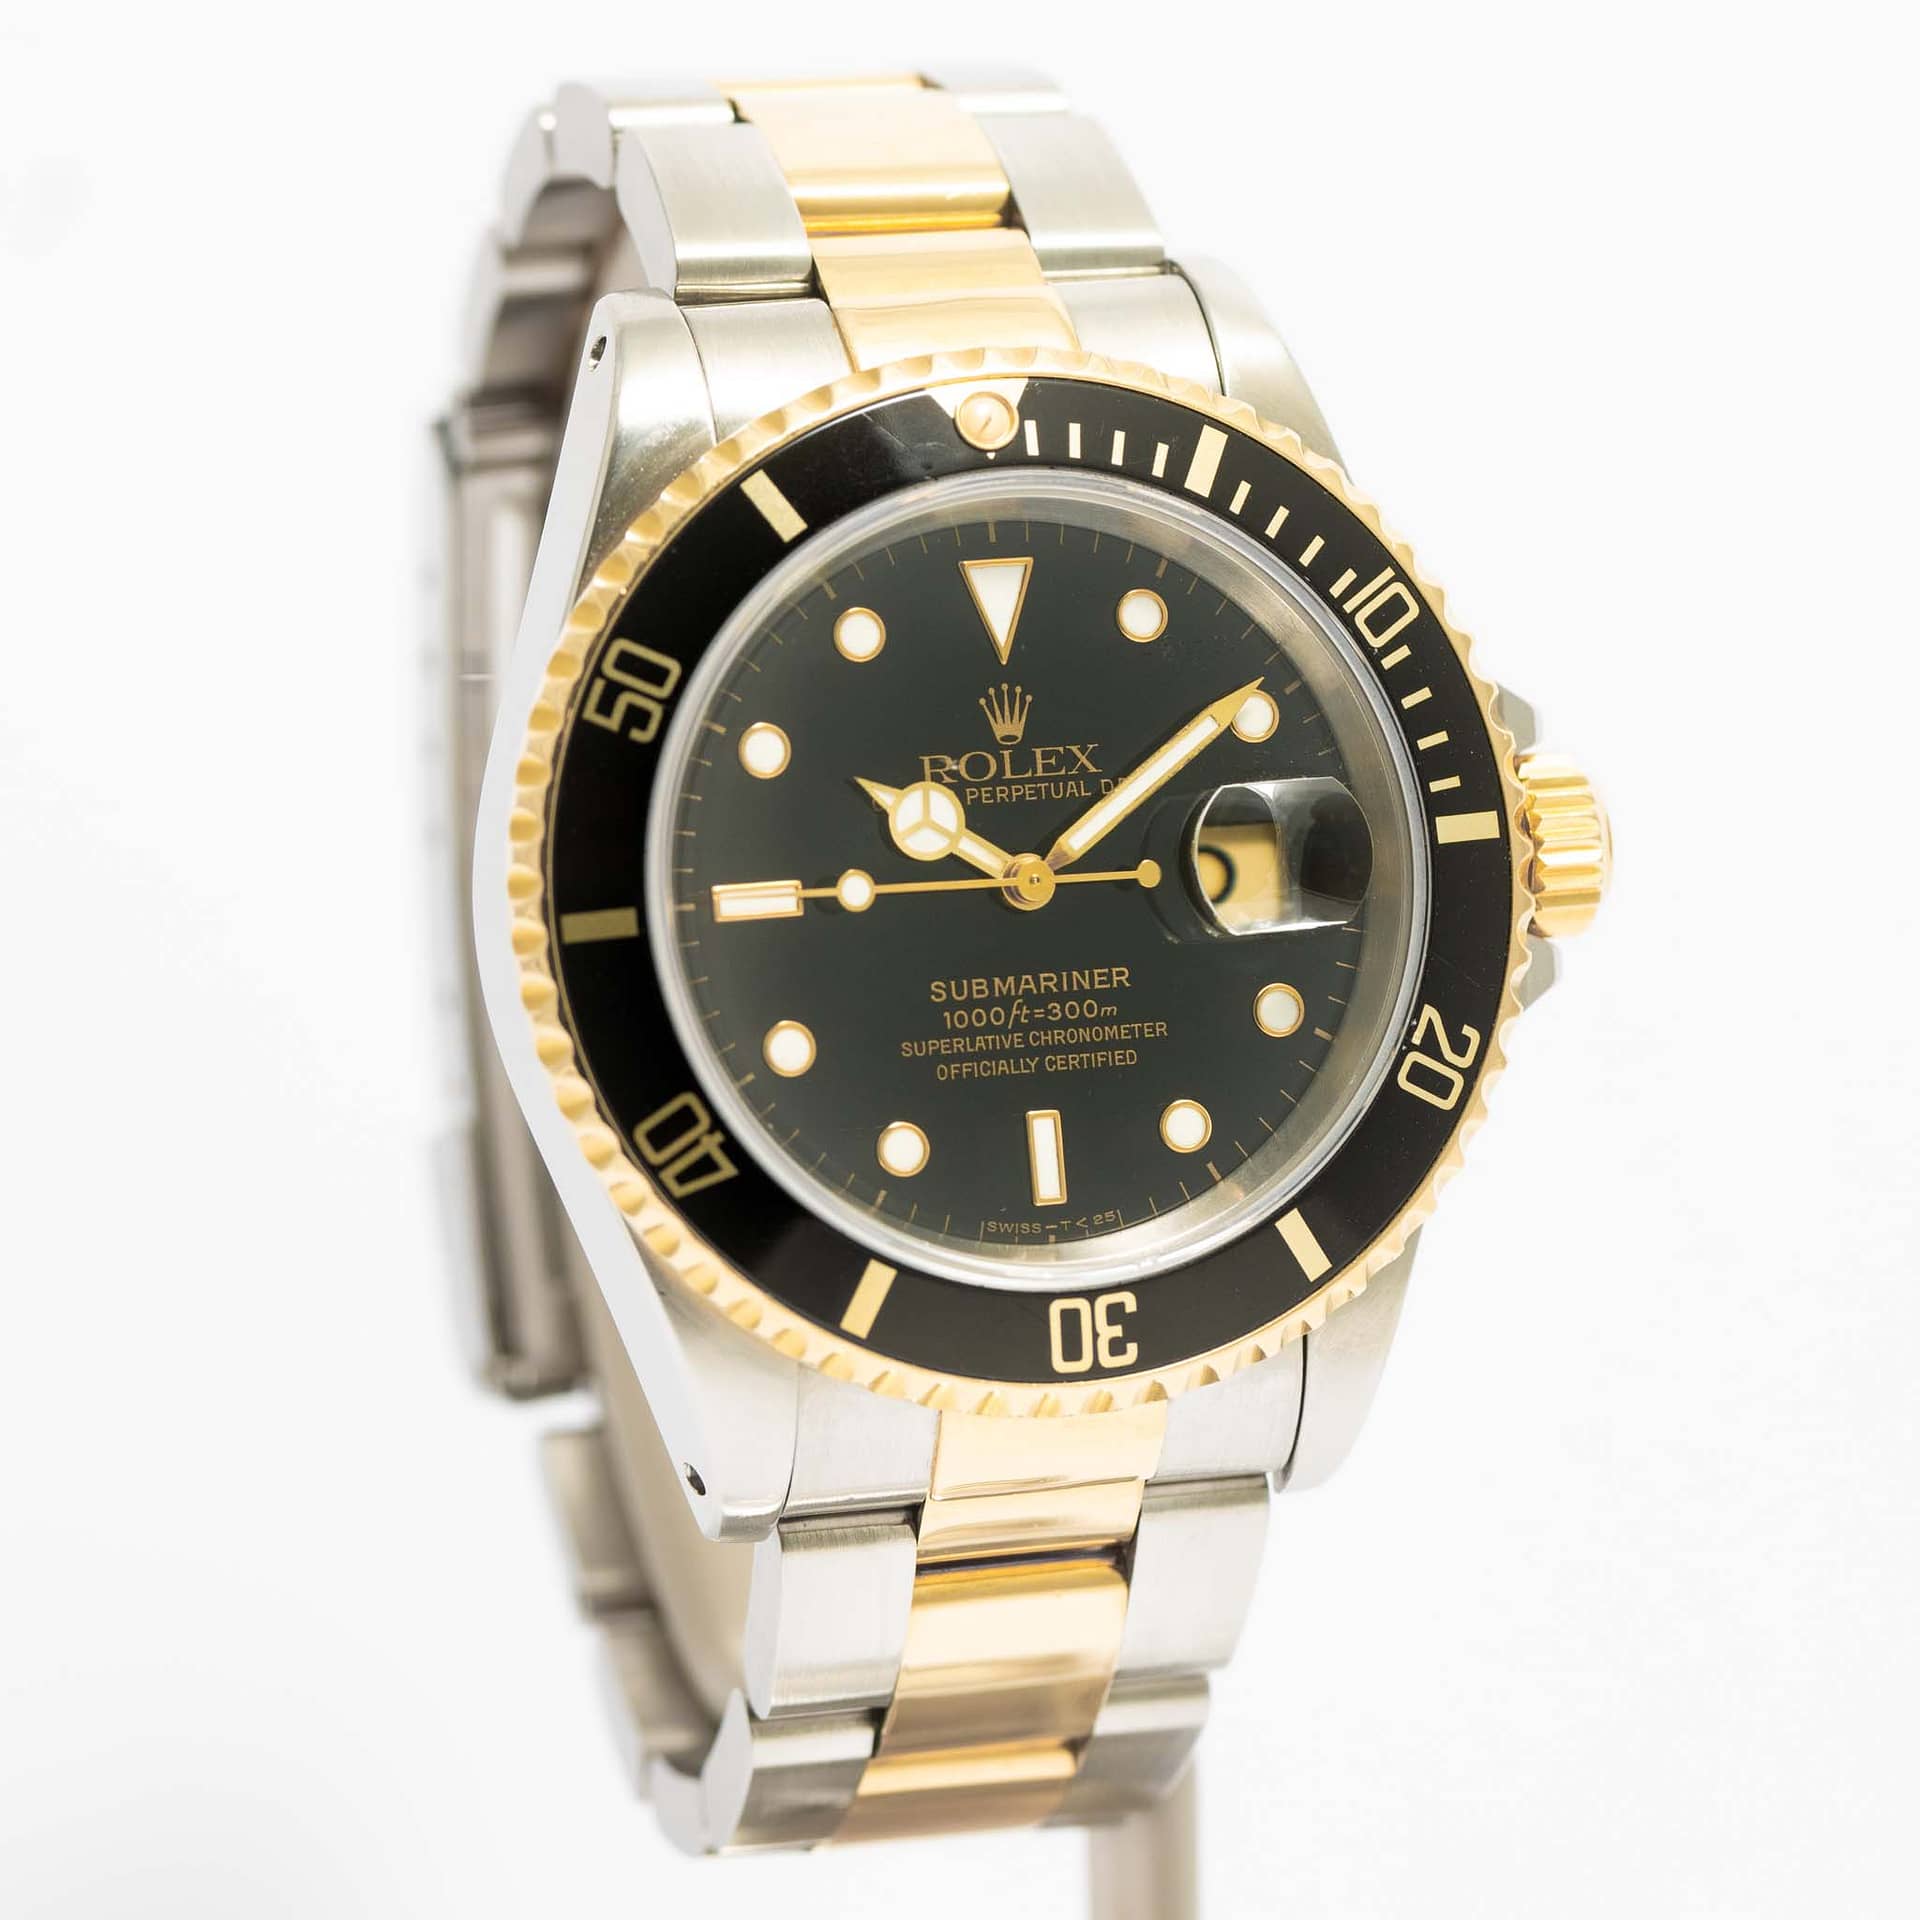 Rolex Date Two-Tone Yellow Gold and Steel 40mm (16613) — Shreve, Crump & Low